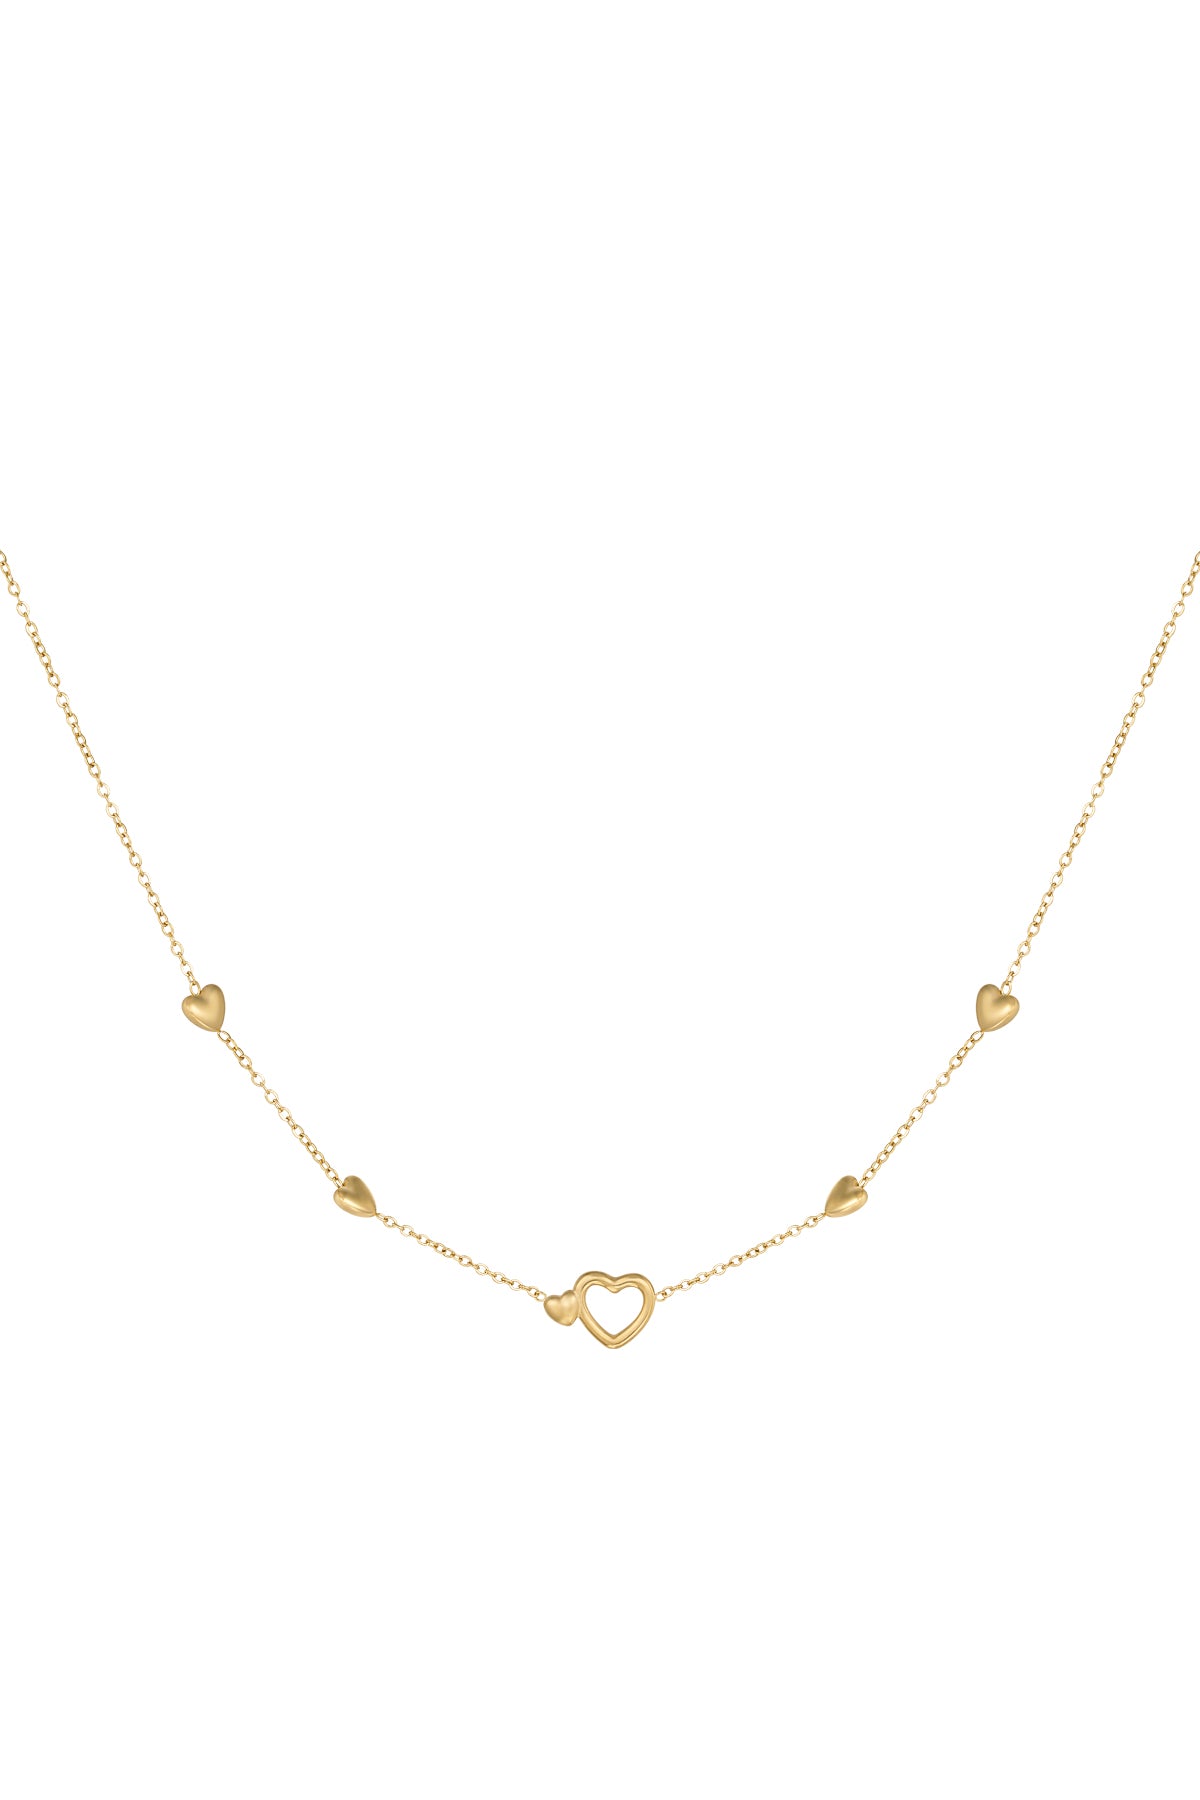 ALL YOU NEED IS LOVE KETTING